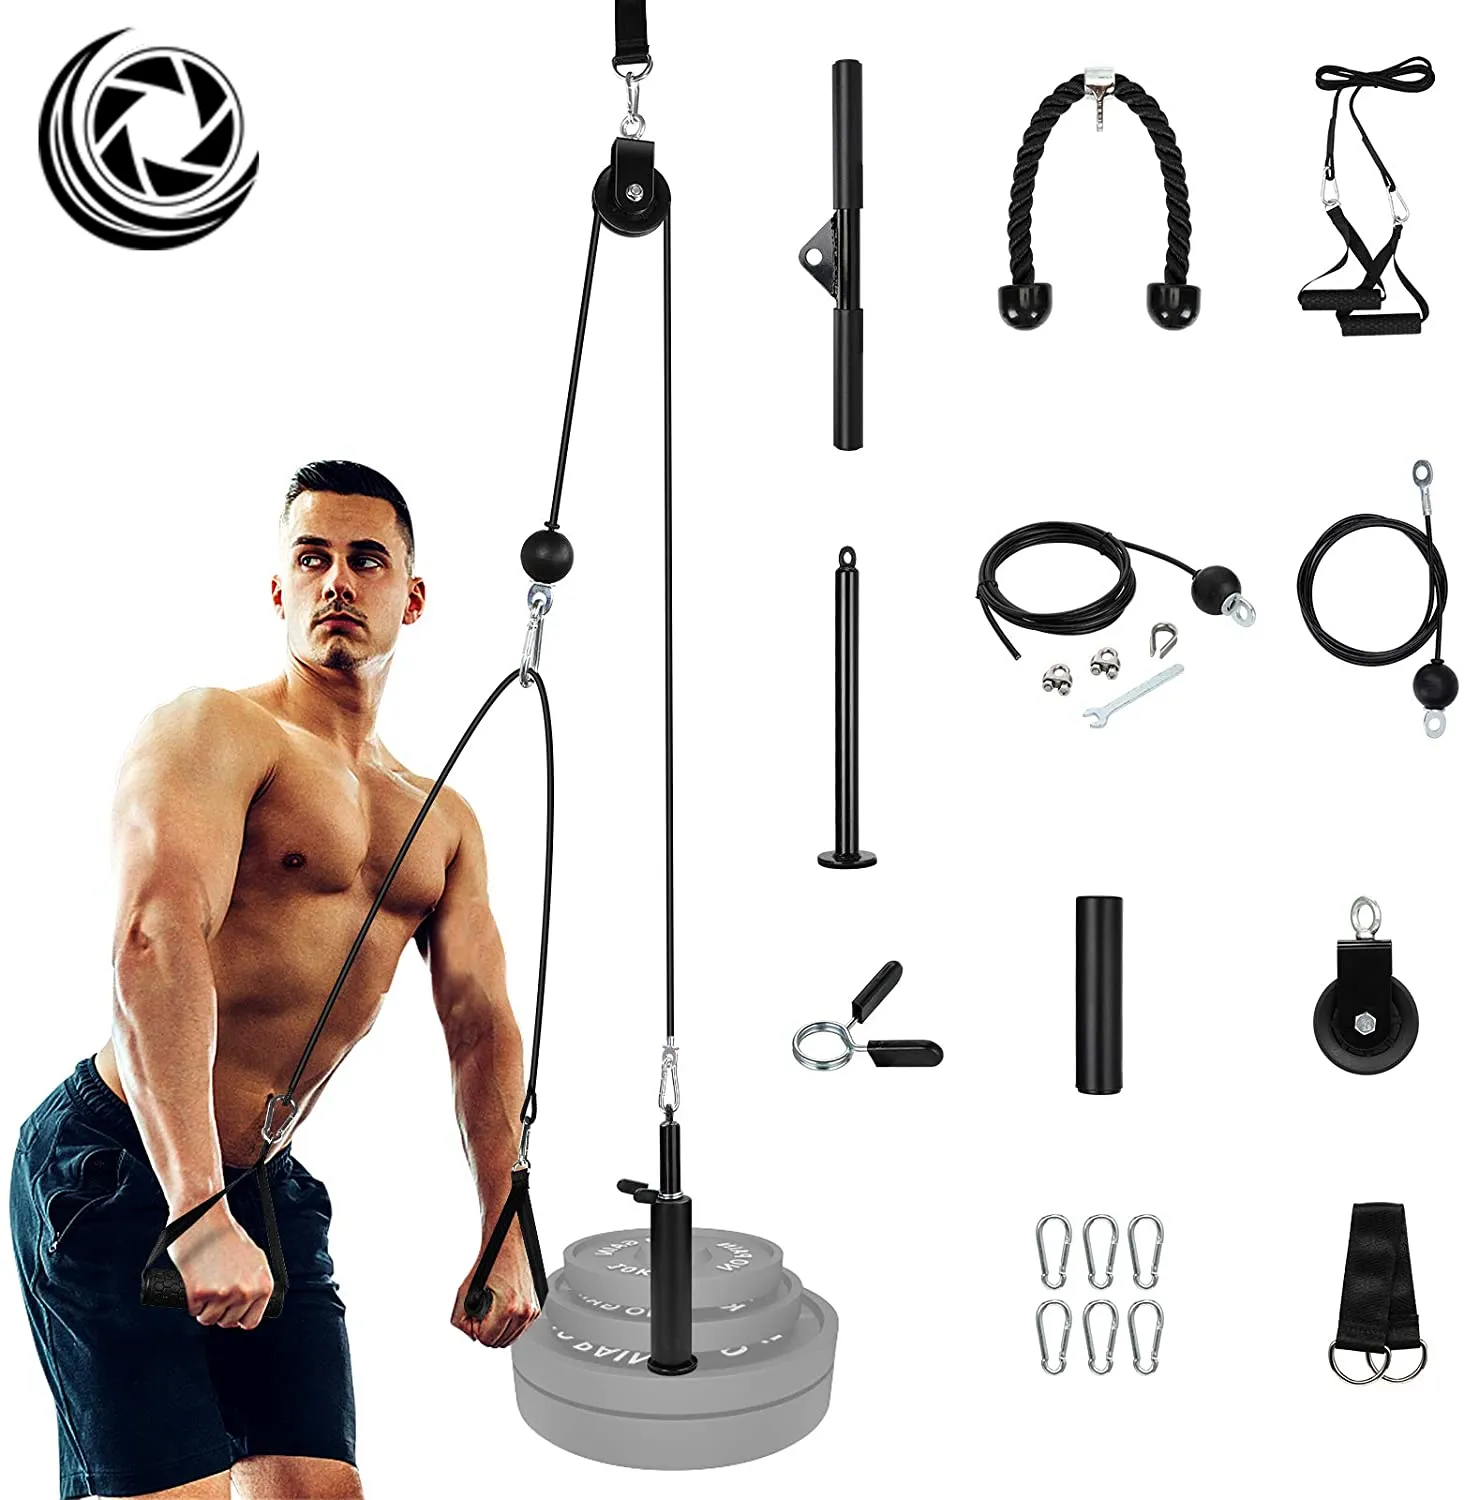 Factory Sales Adjustable Length DIY Fitness Lift Pulley Cable System For Home Gym Sport Training